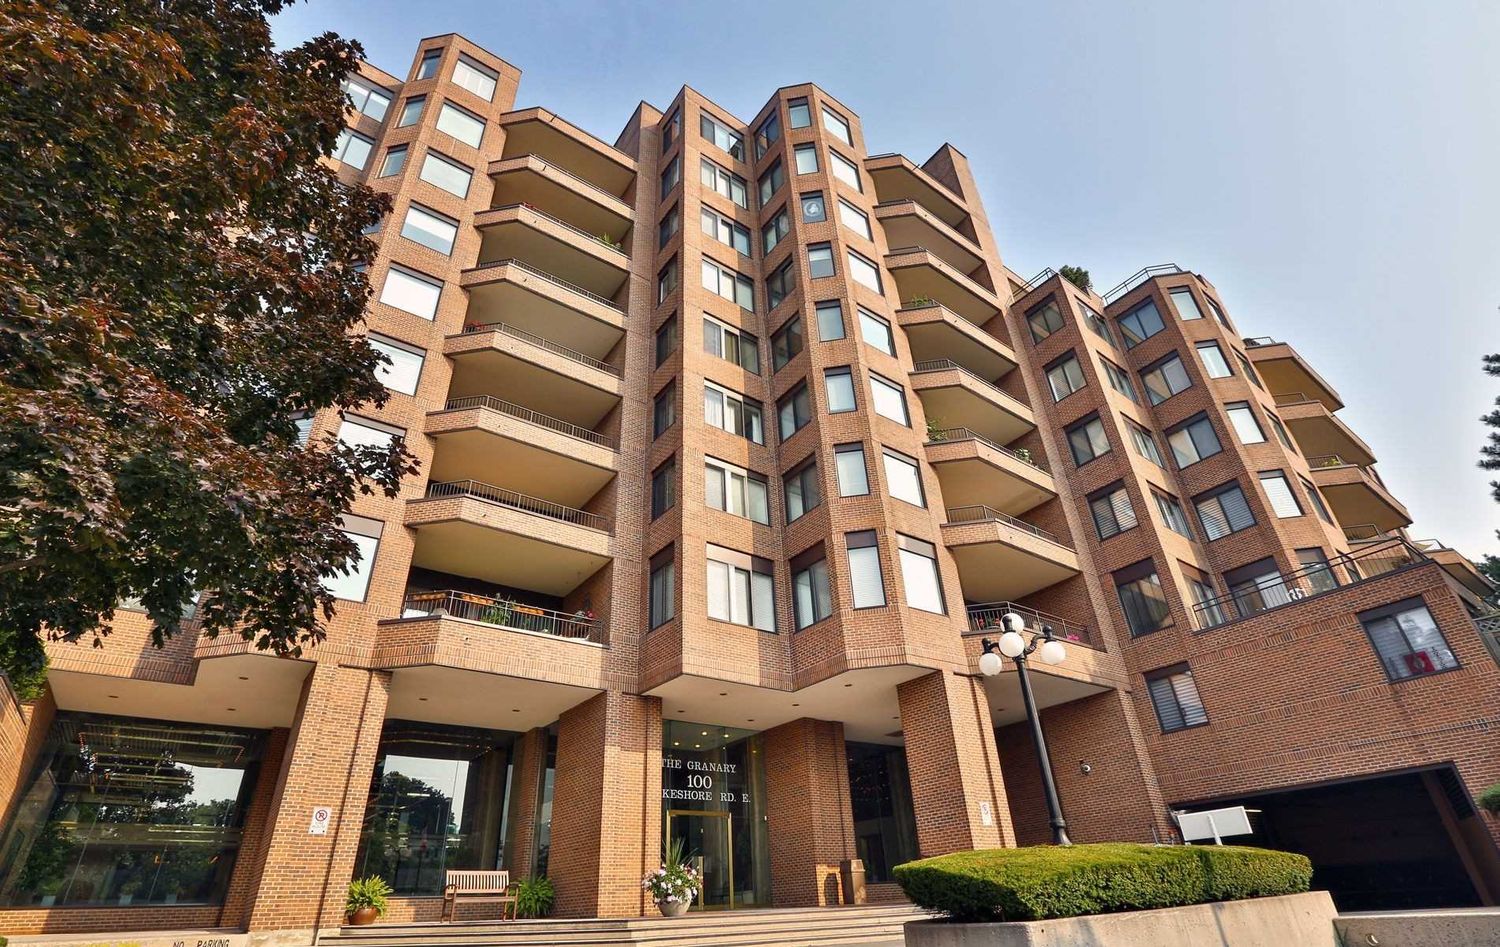 100 Lakeshore Road E. The Granary Condos is located in  Oakville, Toronto - image #2 of 2